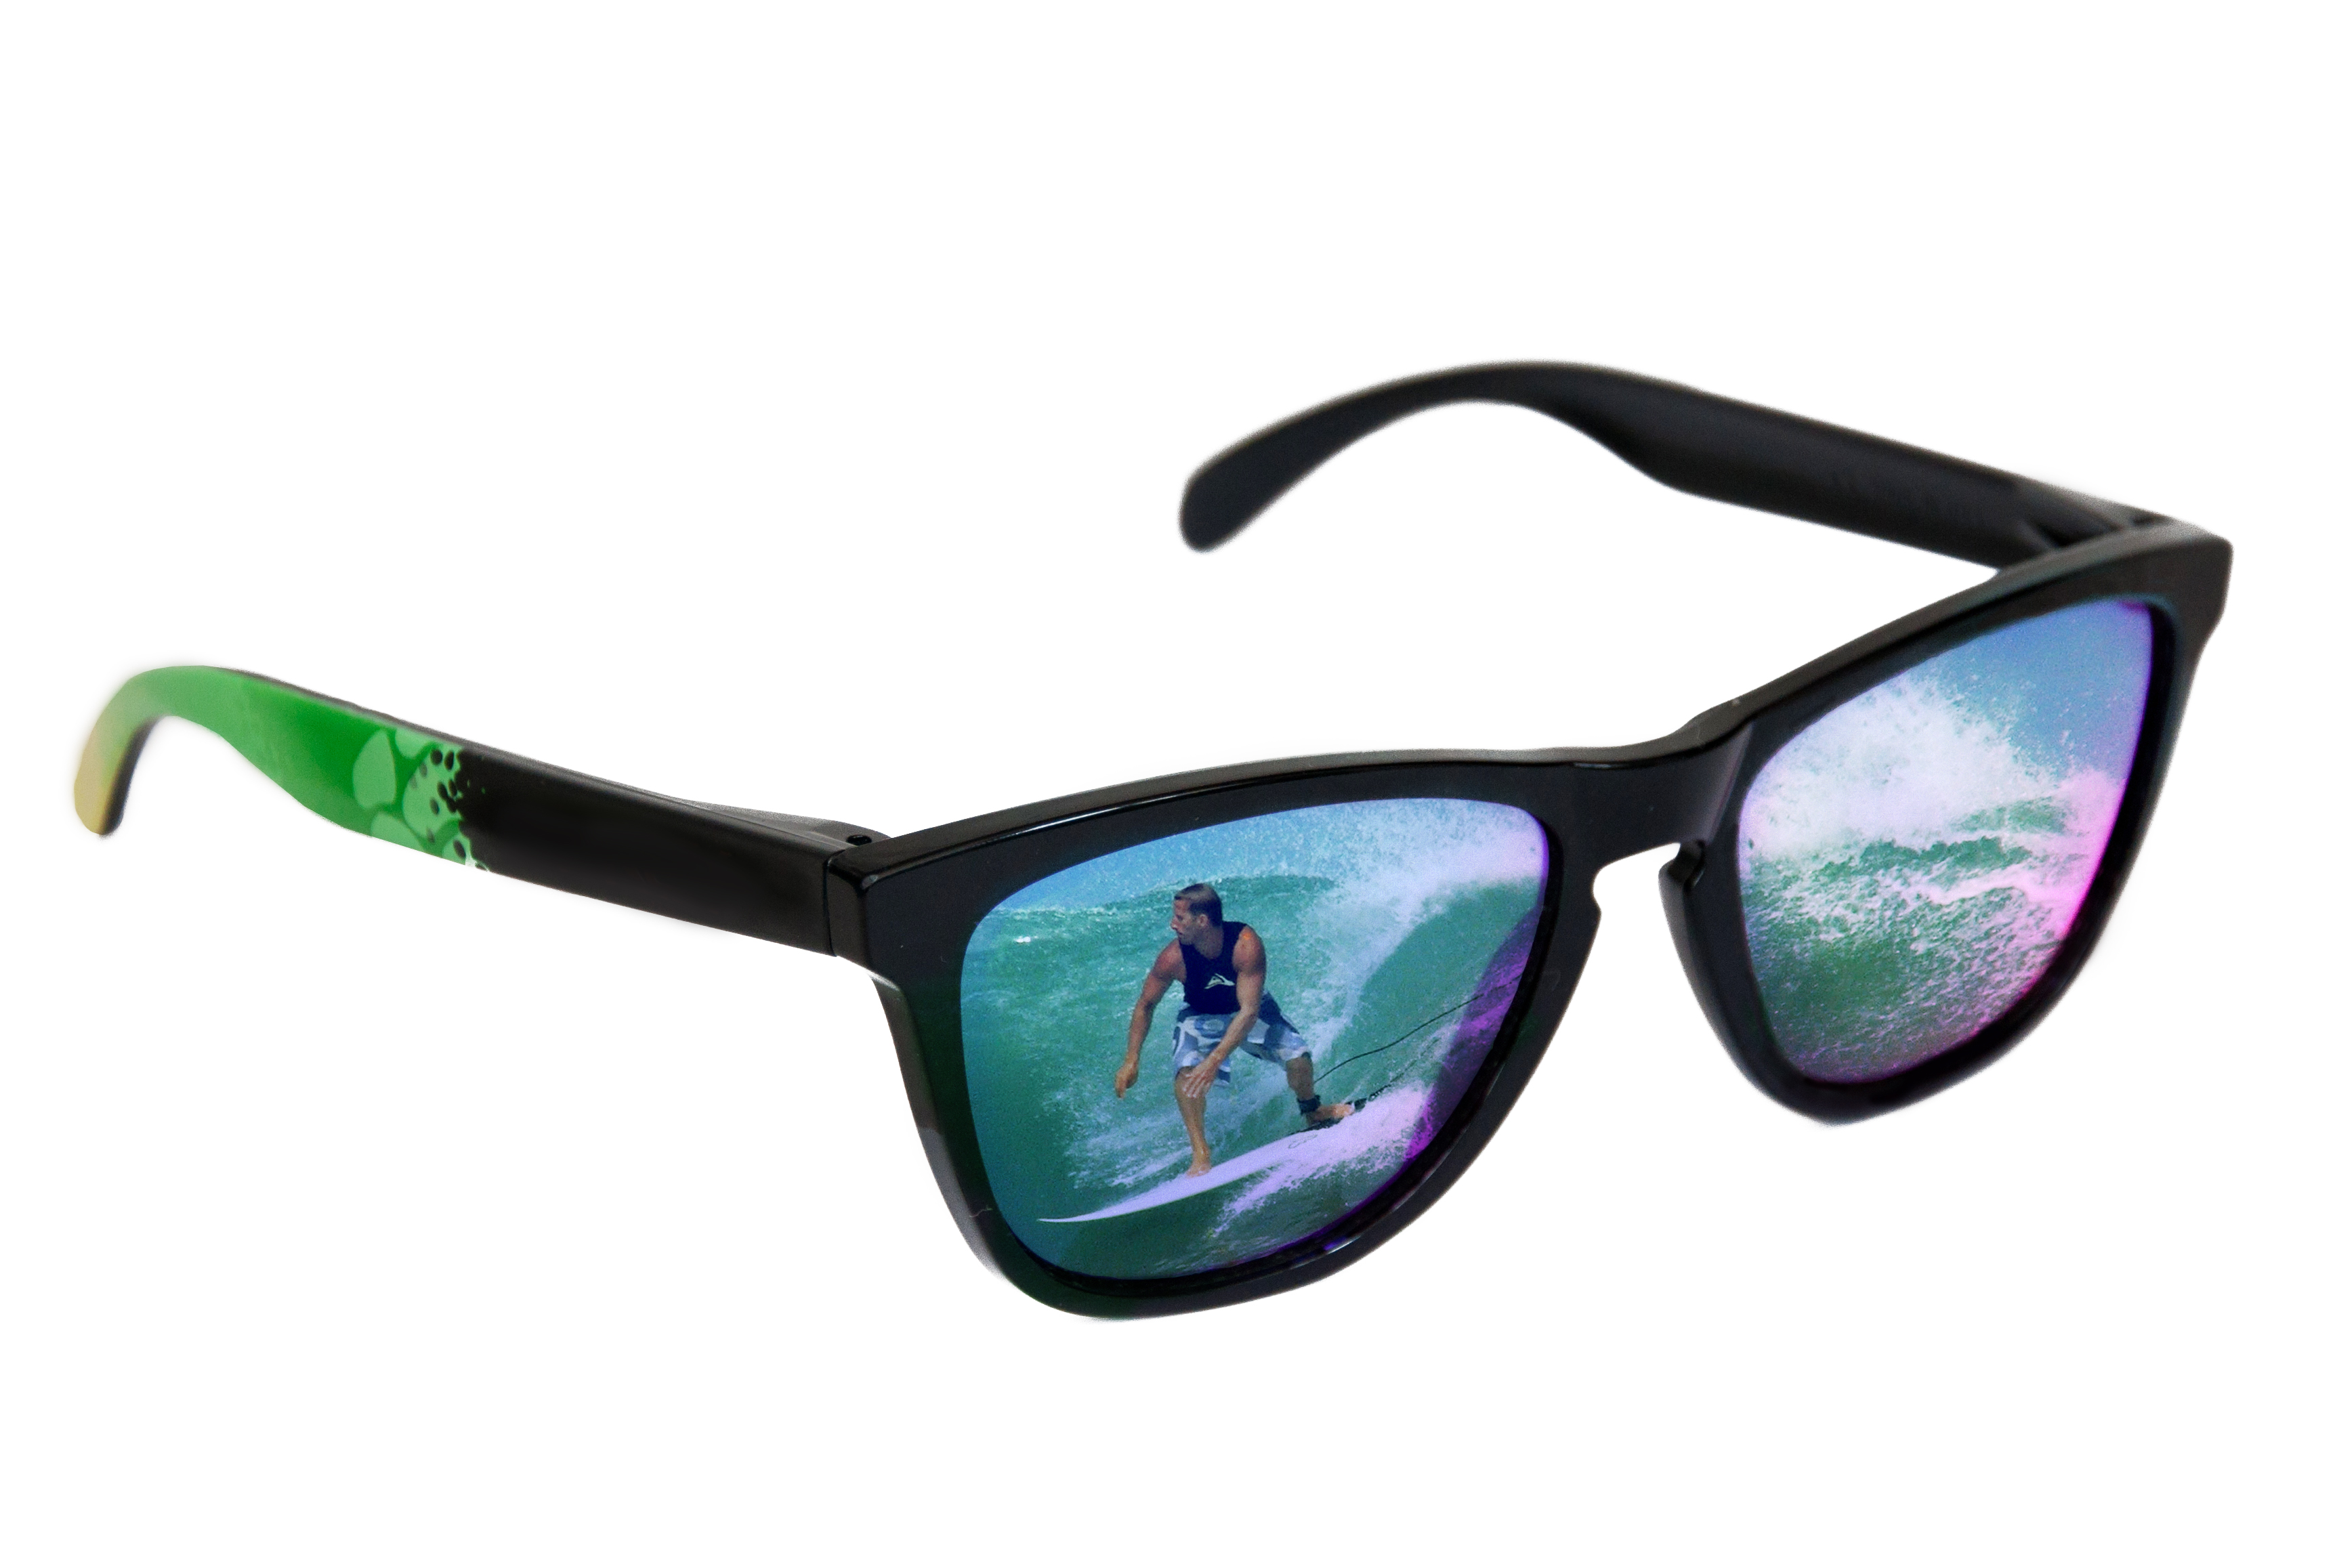 Sunglasses with surfer reflection photo